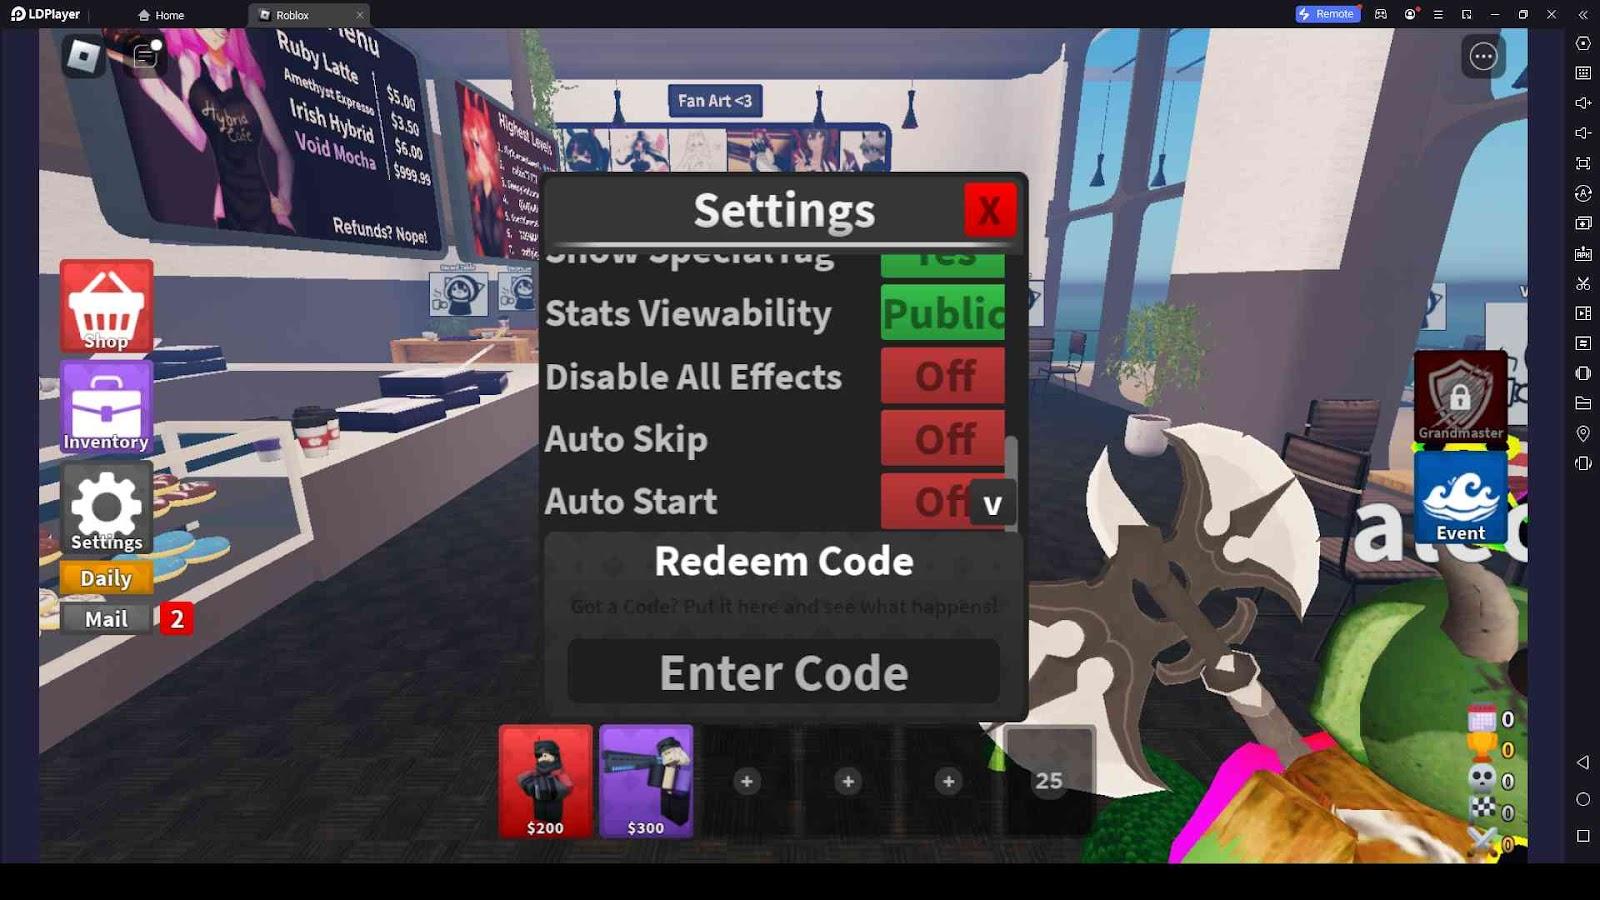 NEW* ALL WORKING CODES FOR Ultimate Tower Defense IN AUGUST ROBLOX